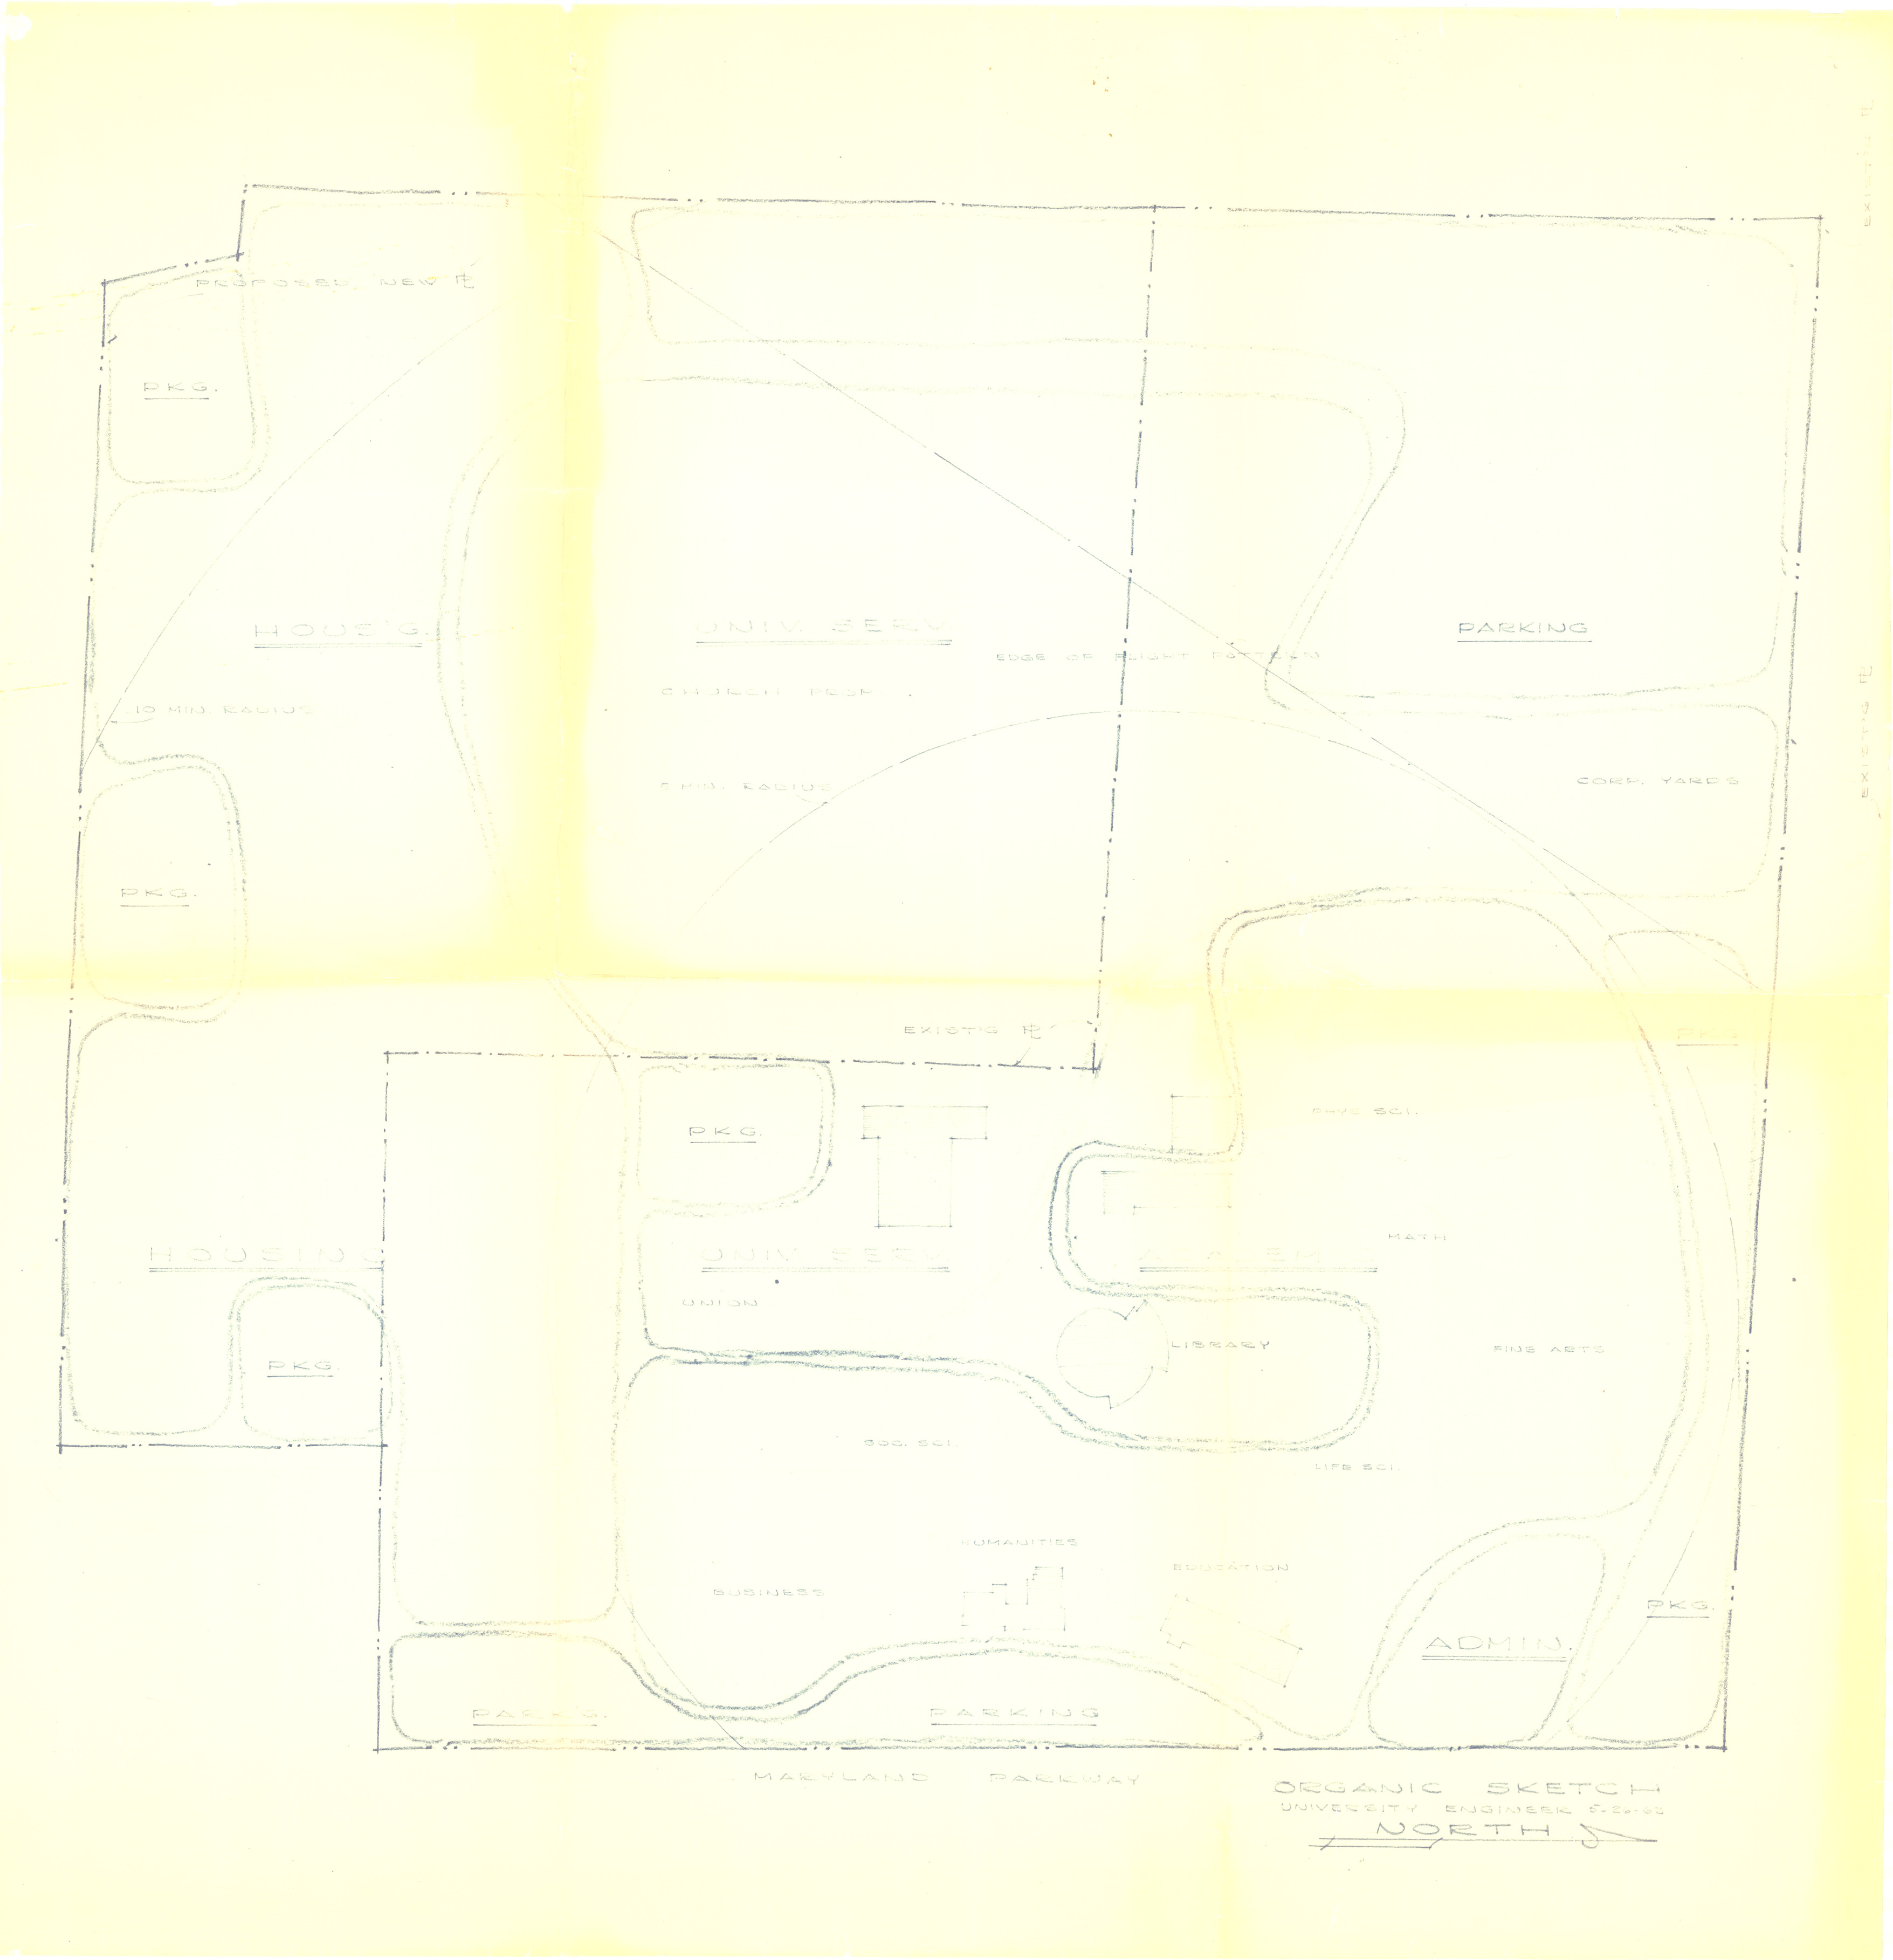 Nevada Southern University master plan: architectural drawings, image 001